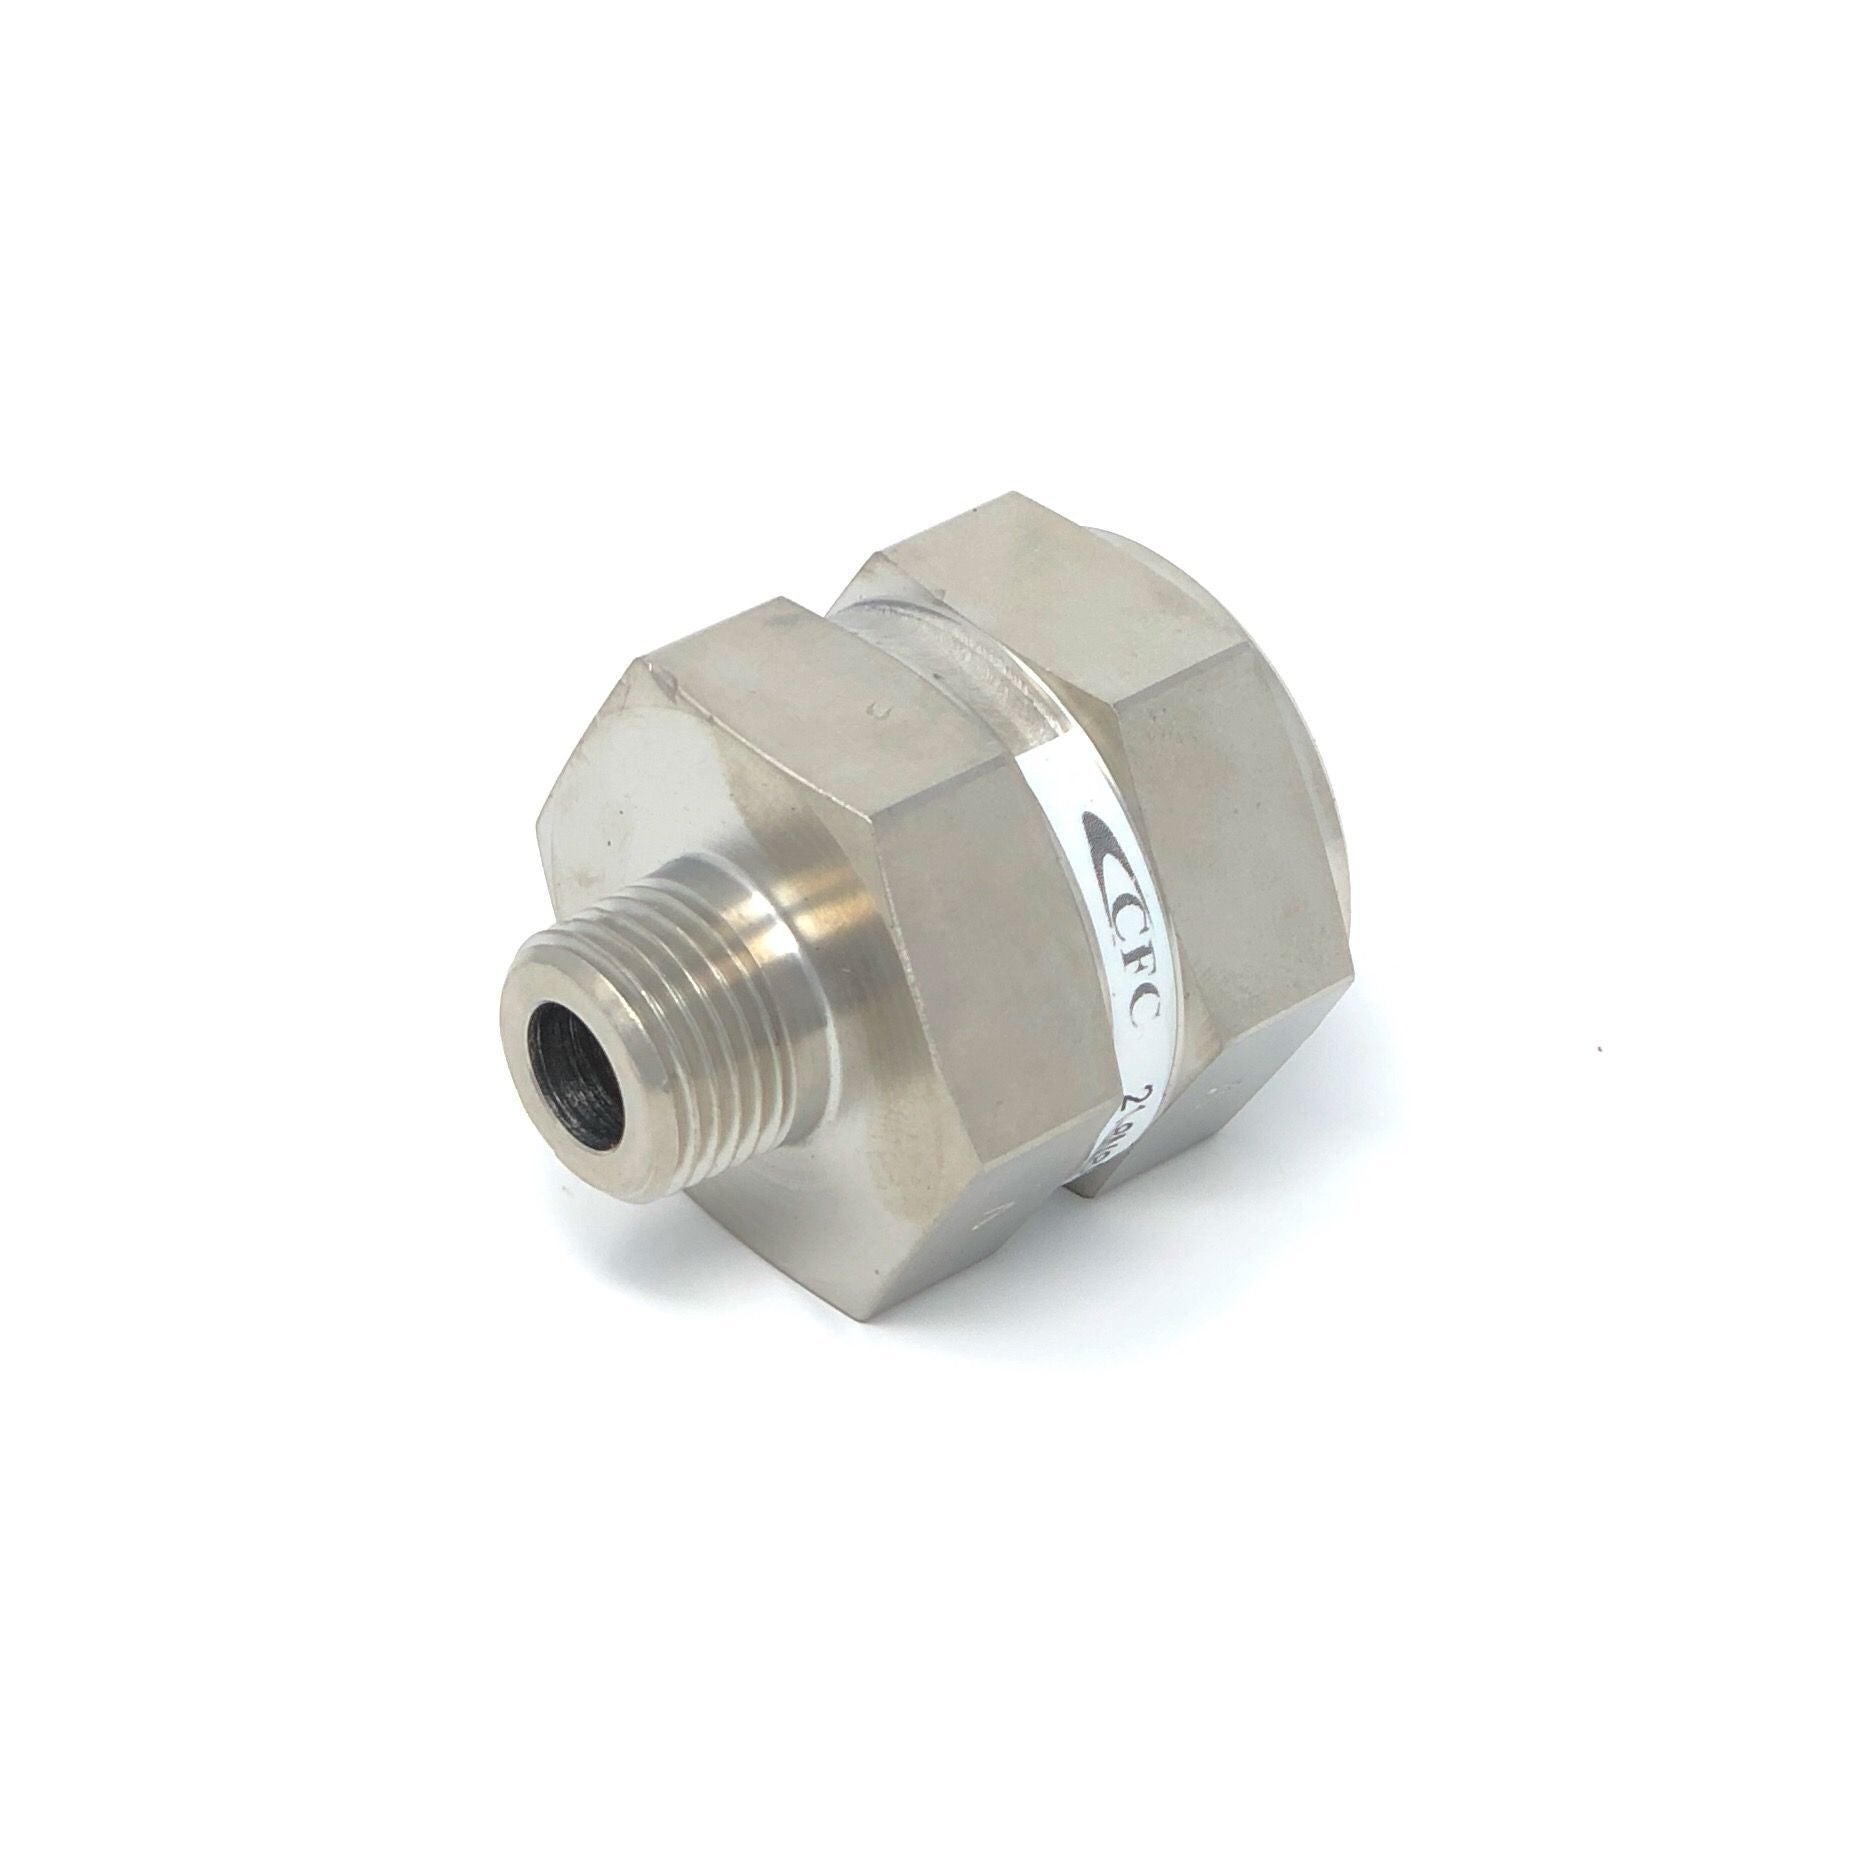 21-4S4S-18S : Chase High Pressure Inline Filter, 6000psi, #4 SAE (1/4"), 18 Micron, No Visual Indicator, No Bypass